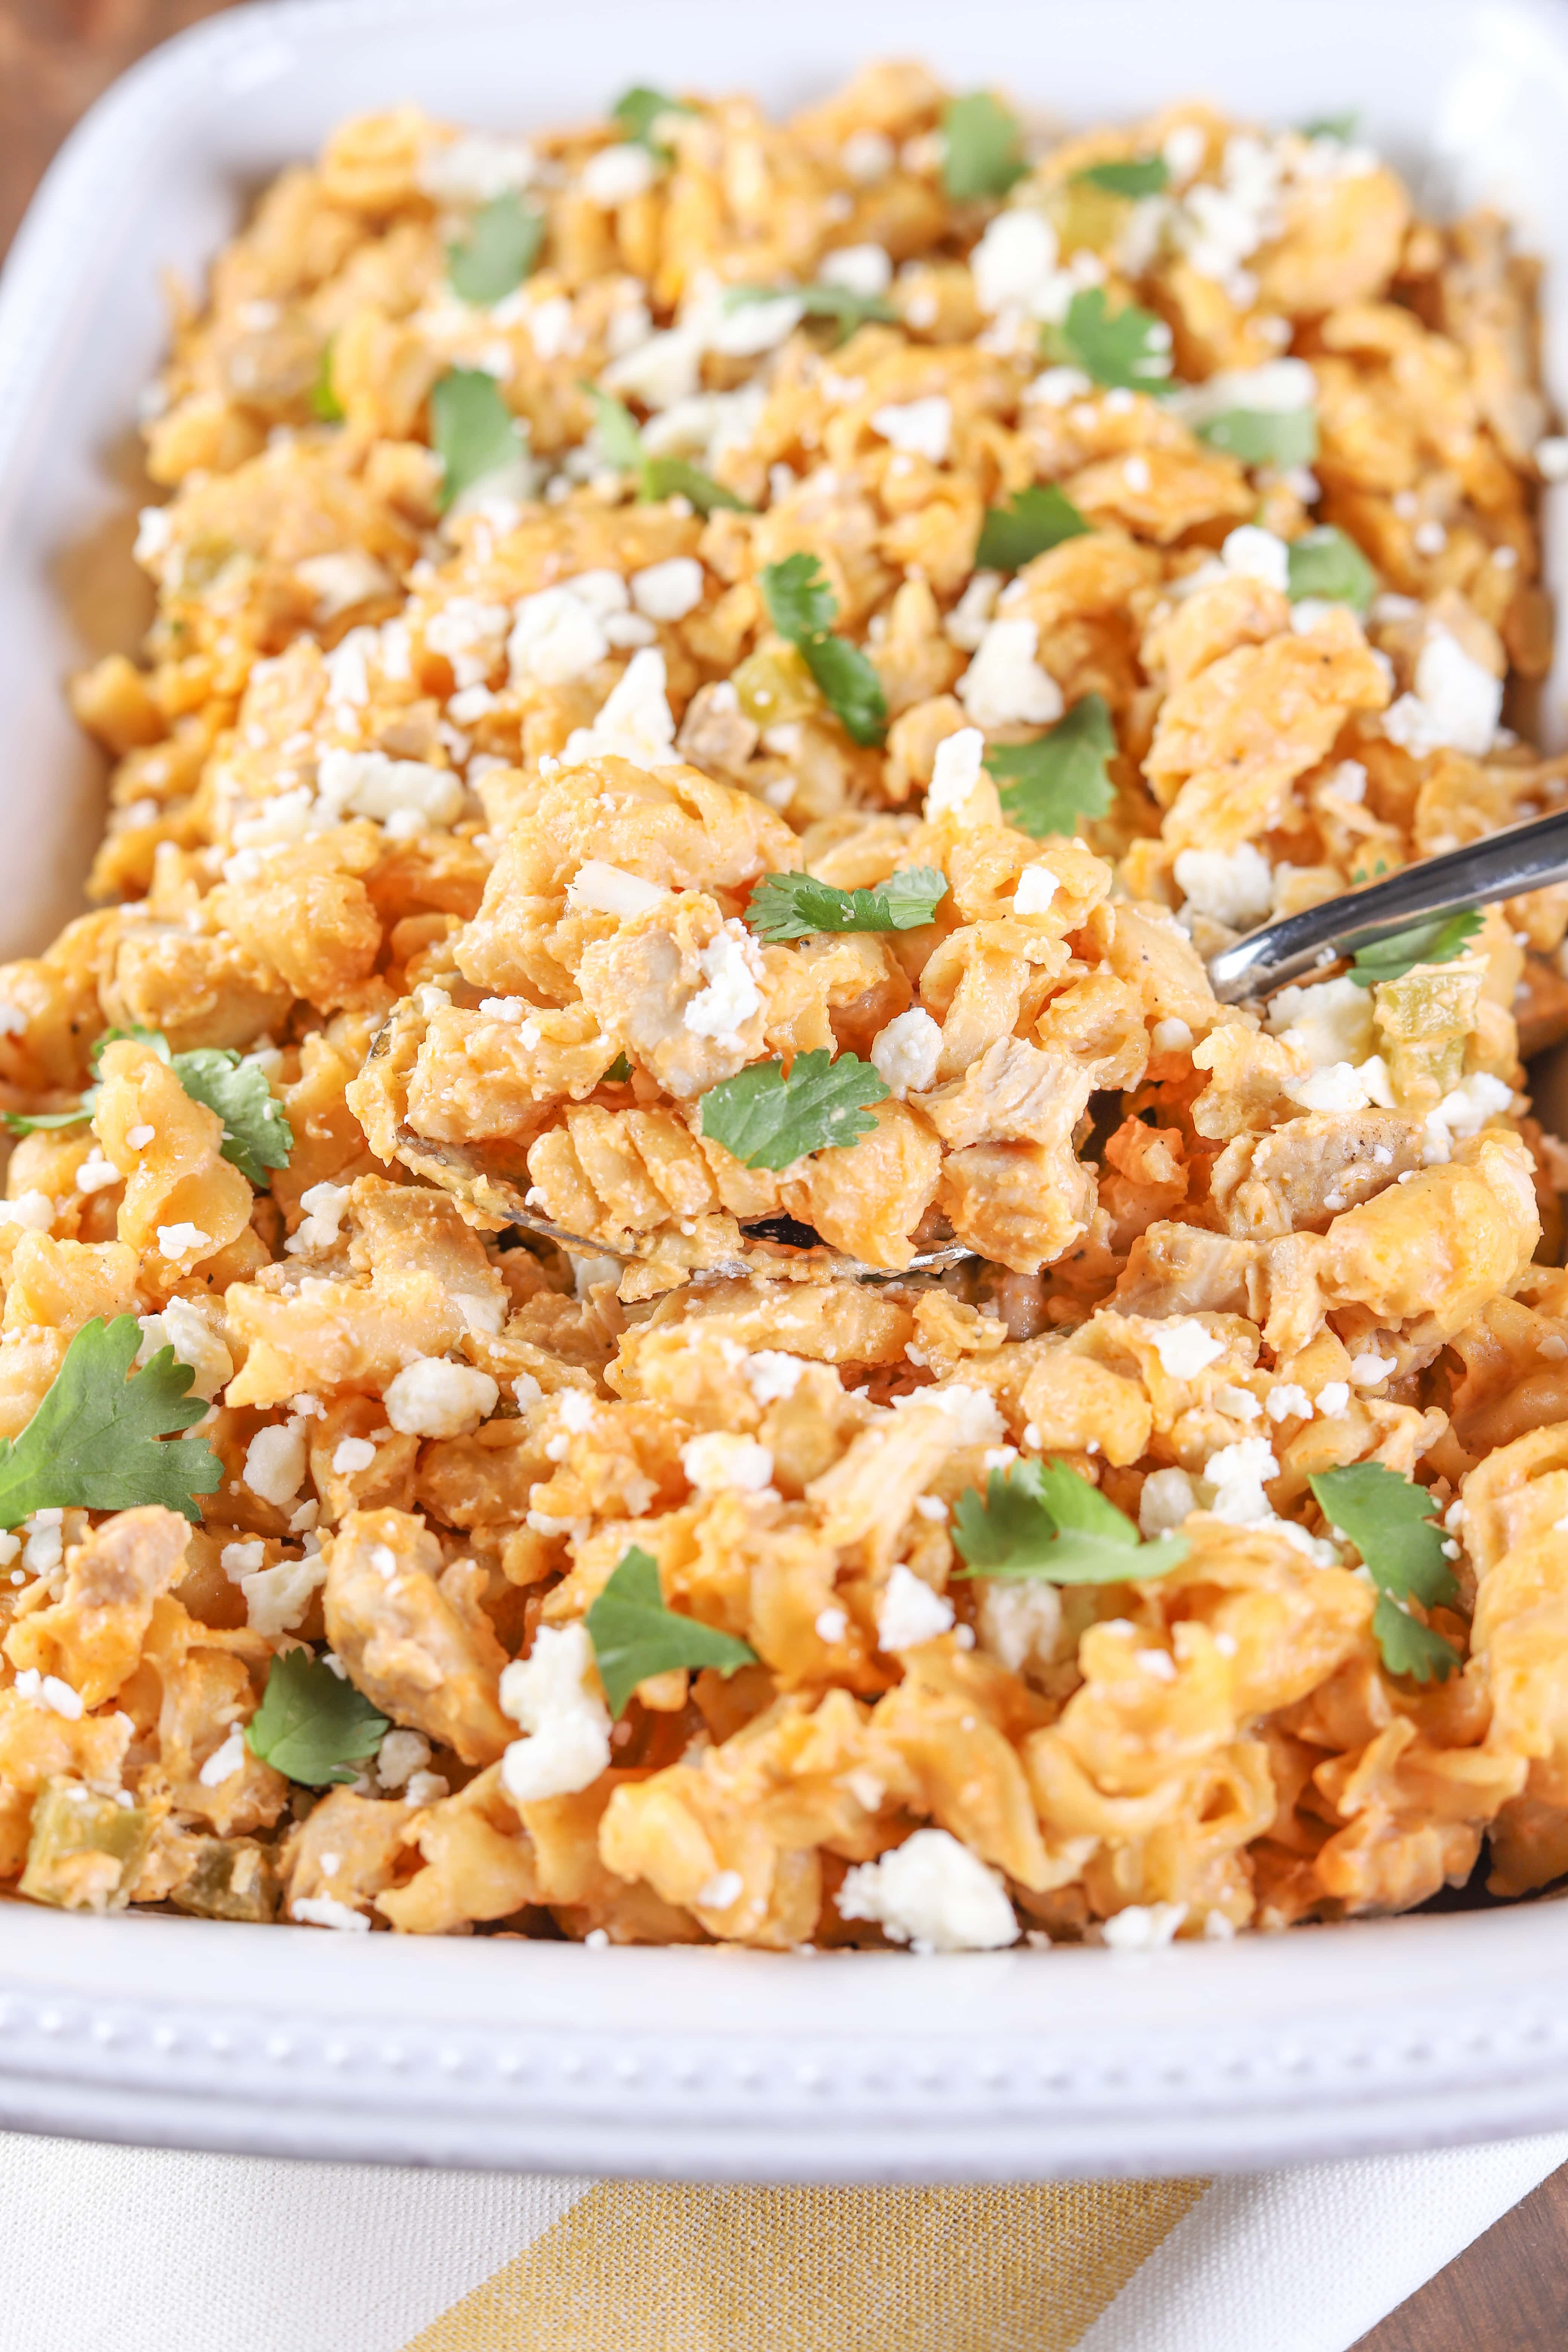 Lightened Up Slow Cooker Buffalo Chicken Pasta Recipe from A Kitchen Addiction